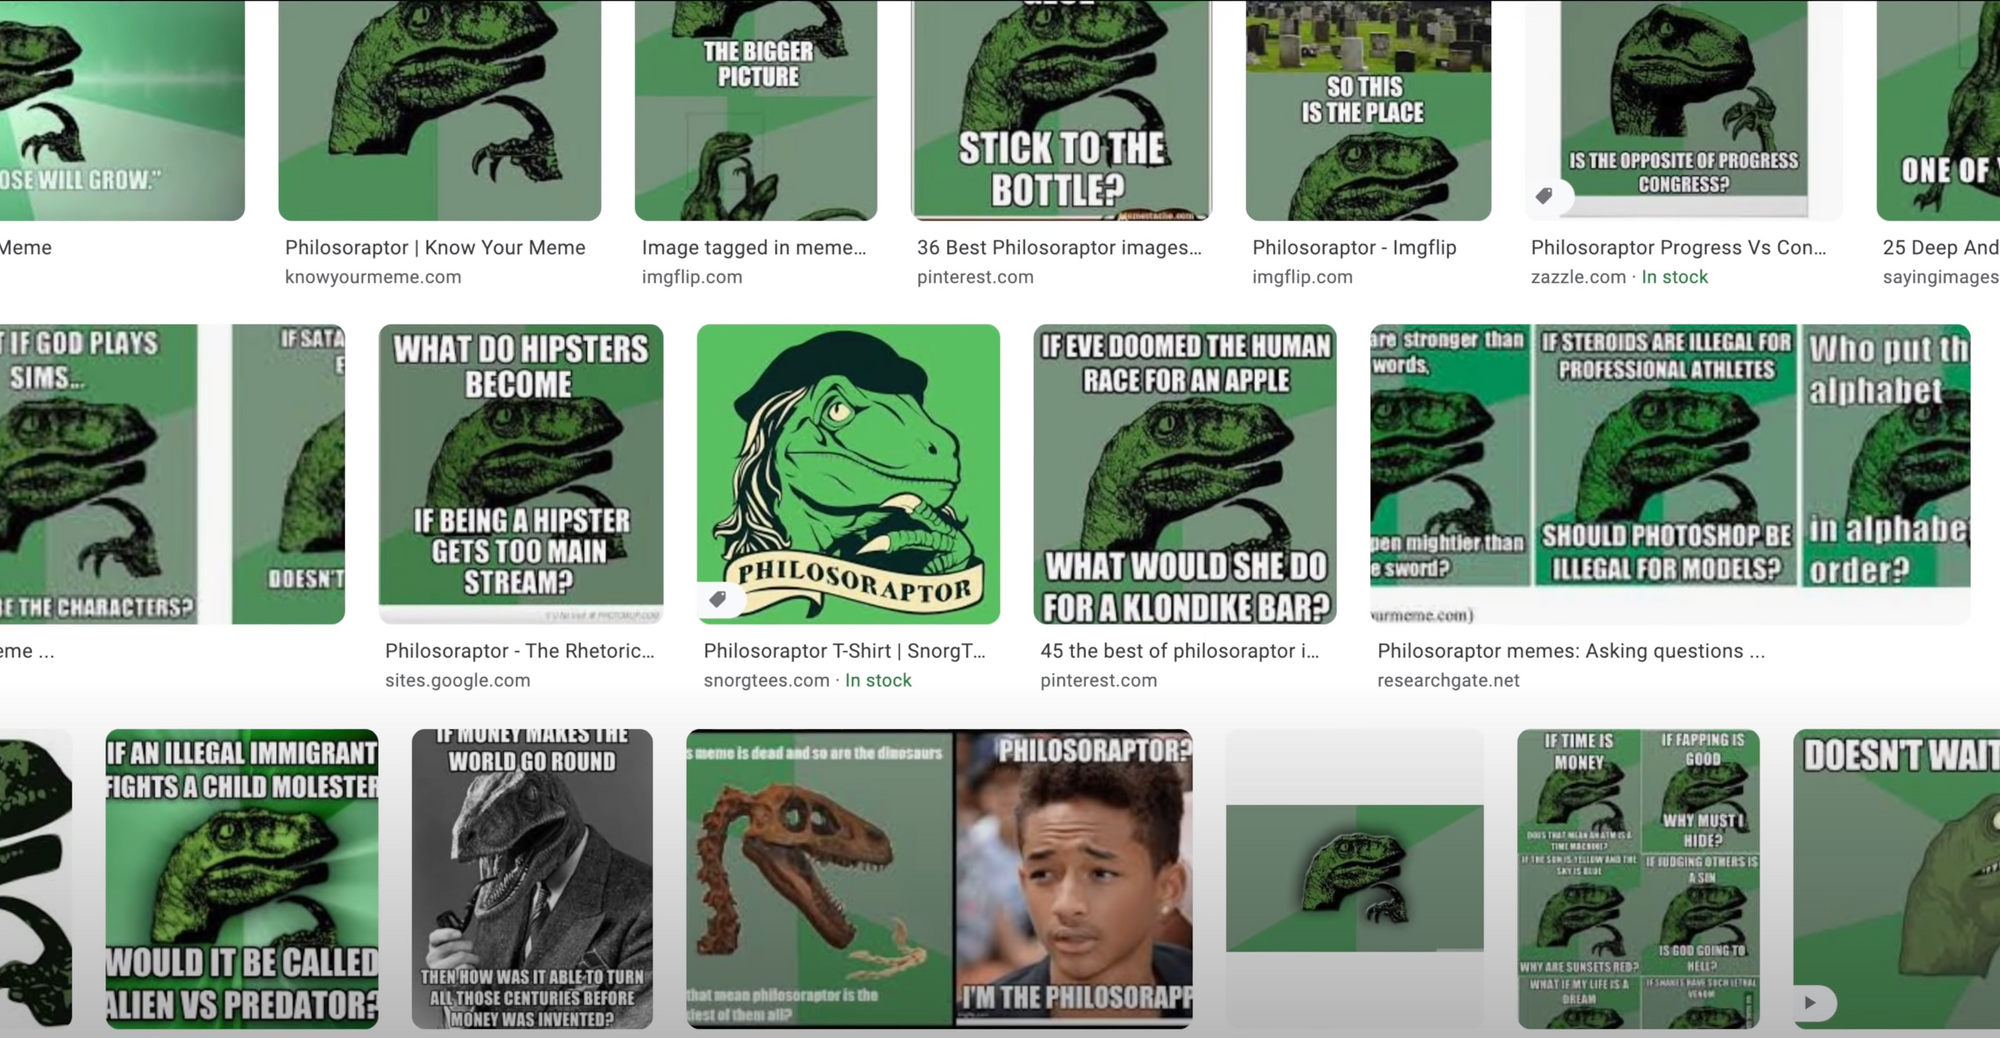 Collage of Philosoraptor memes depicting philosophical and humorous questions related to the meme genre